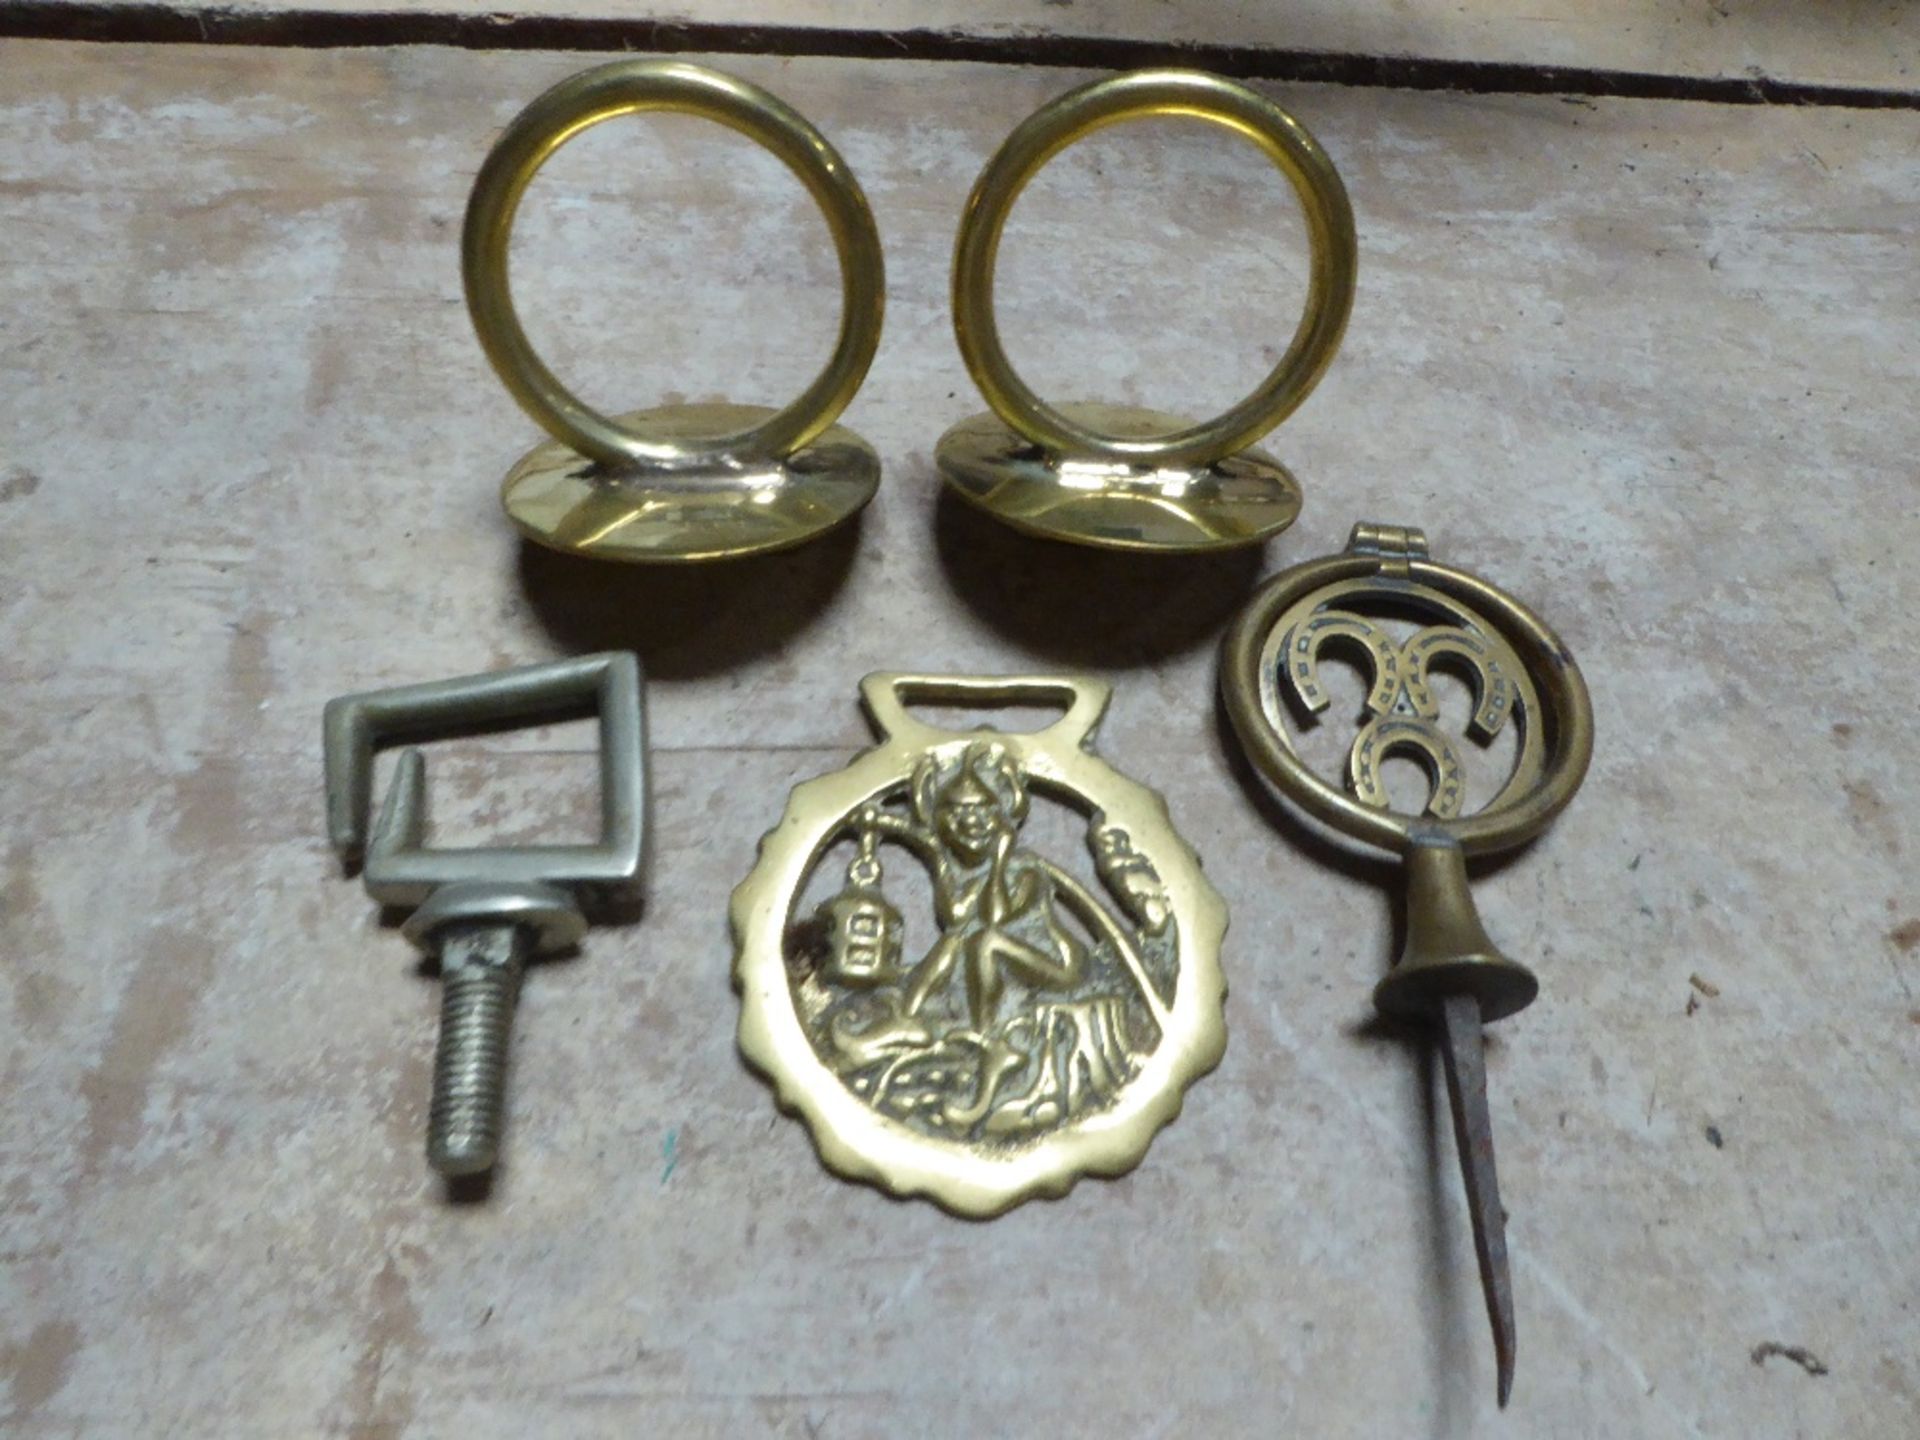 Two brass rein terrets, a swinger, a Pixie horse brass and a whitemetal terret